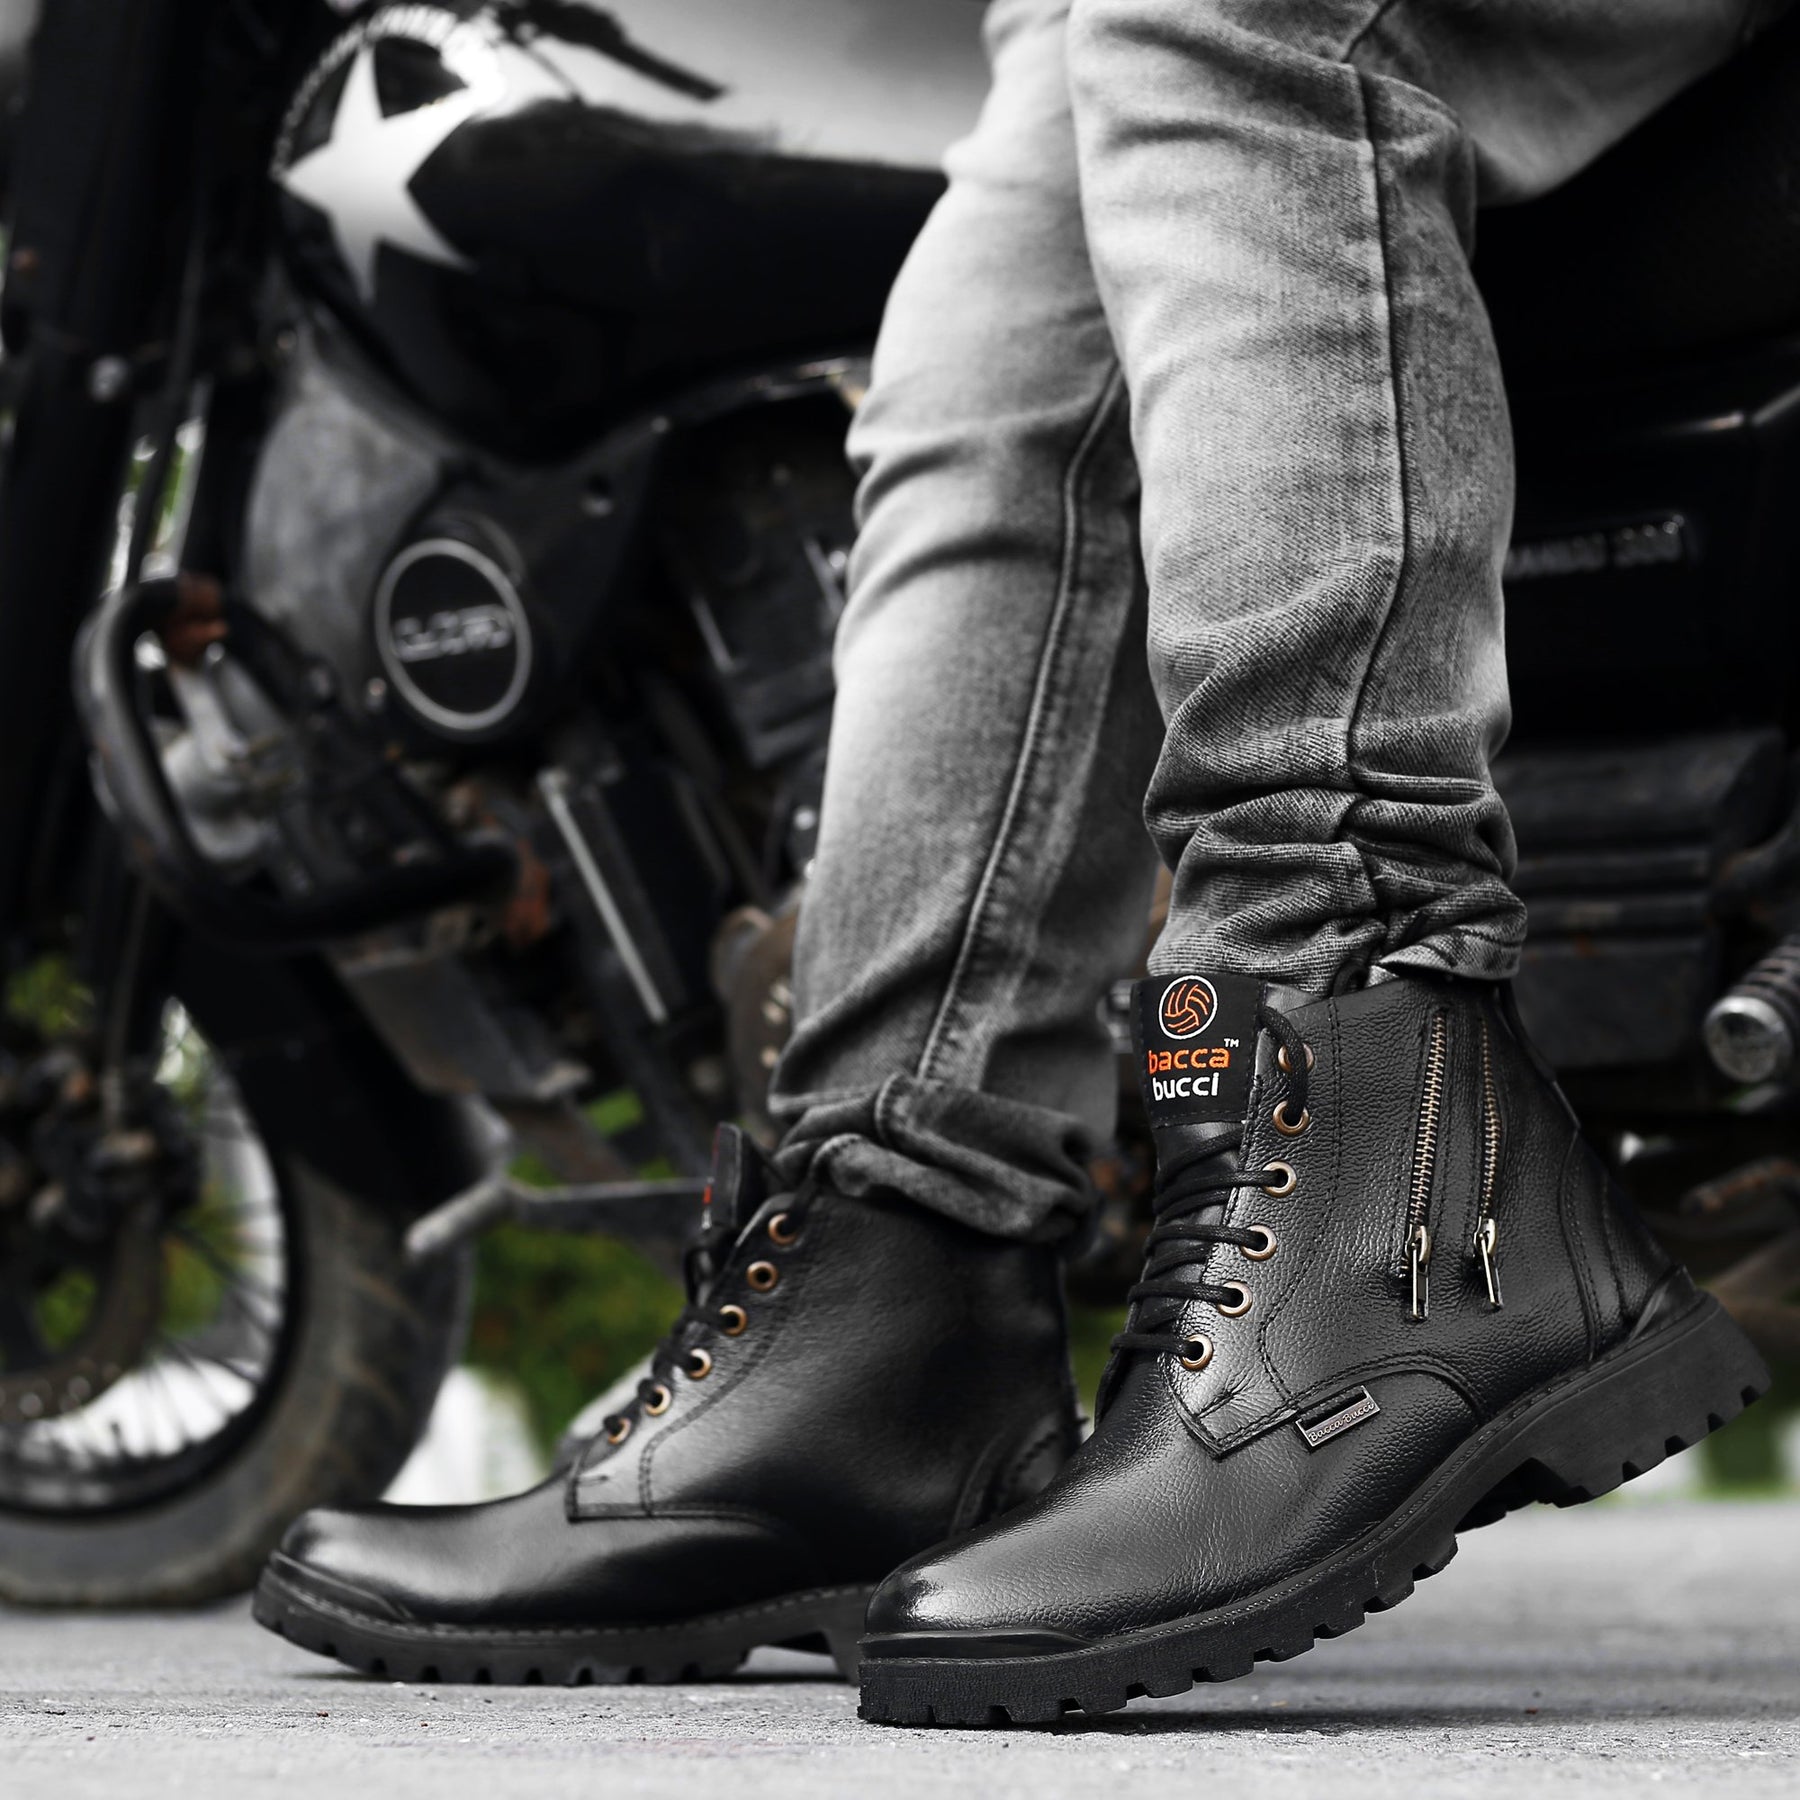 military boots, leather boots, leather boots for men, genuine leather boots, black leather boots